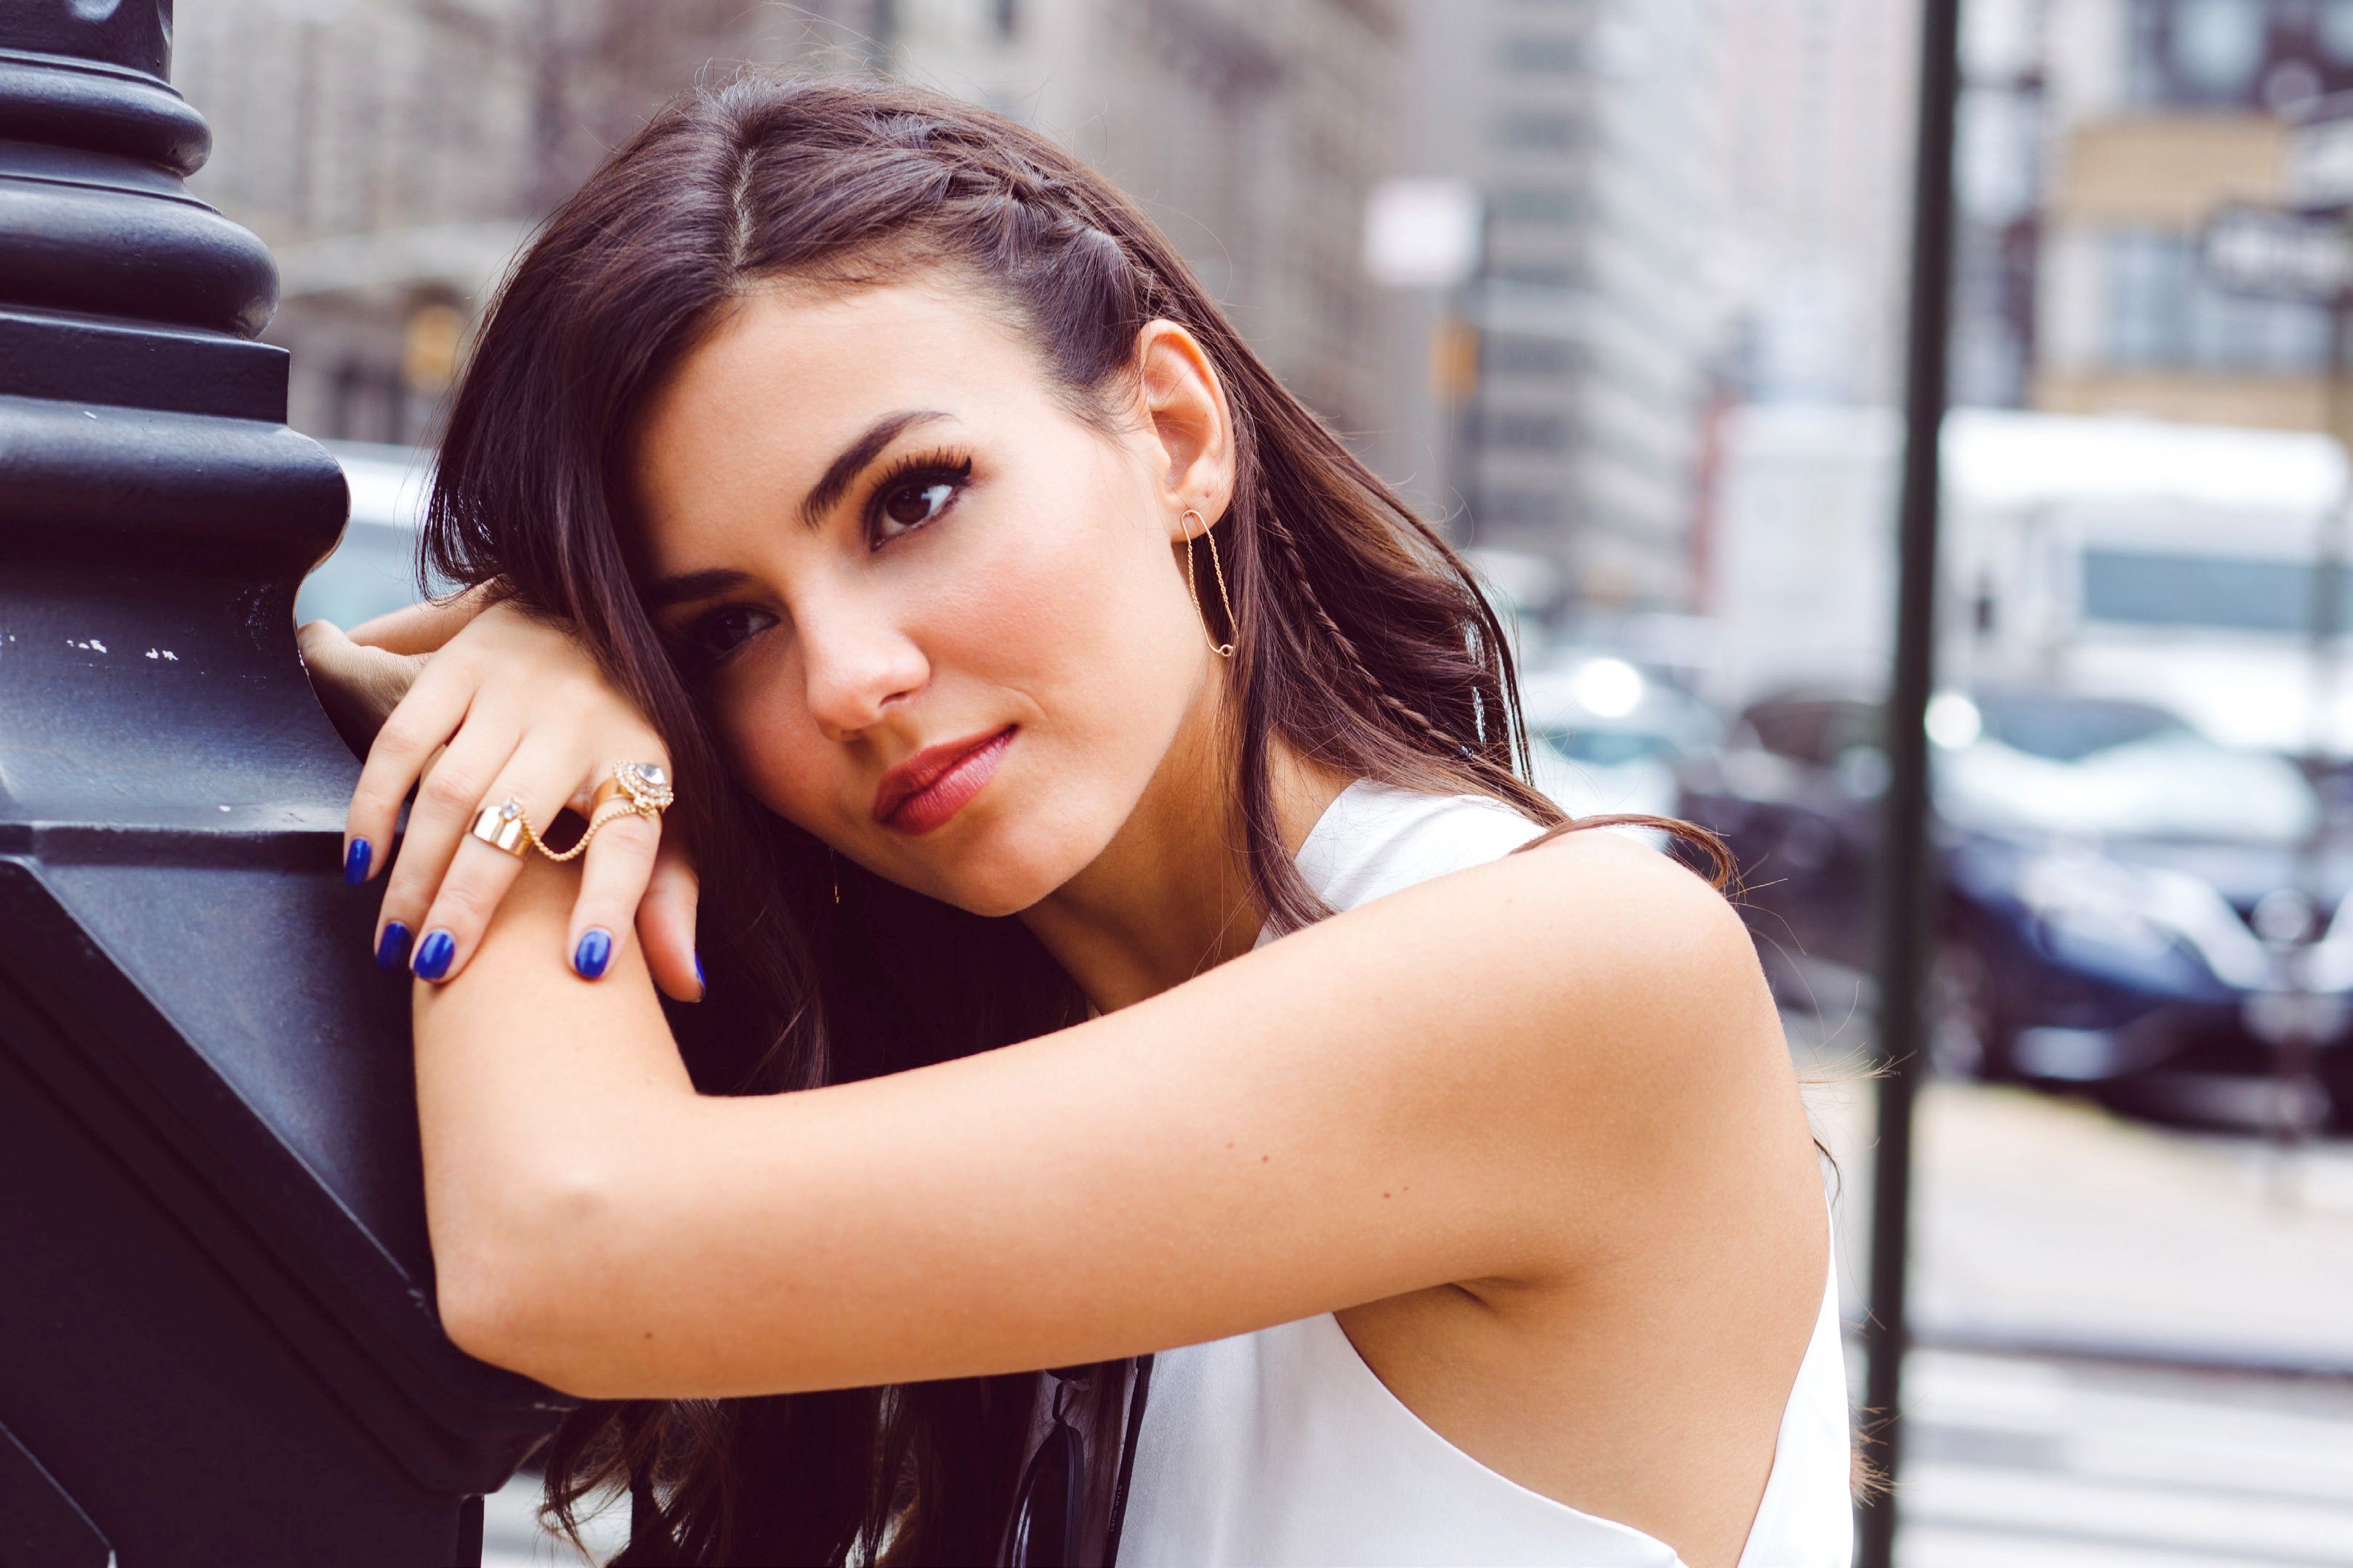 Victoria Justice Photoshoot 2017 Wallpapers